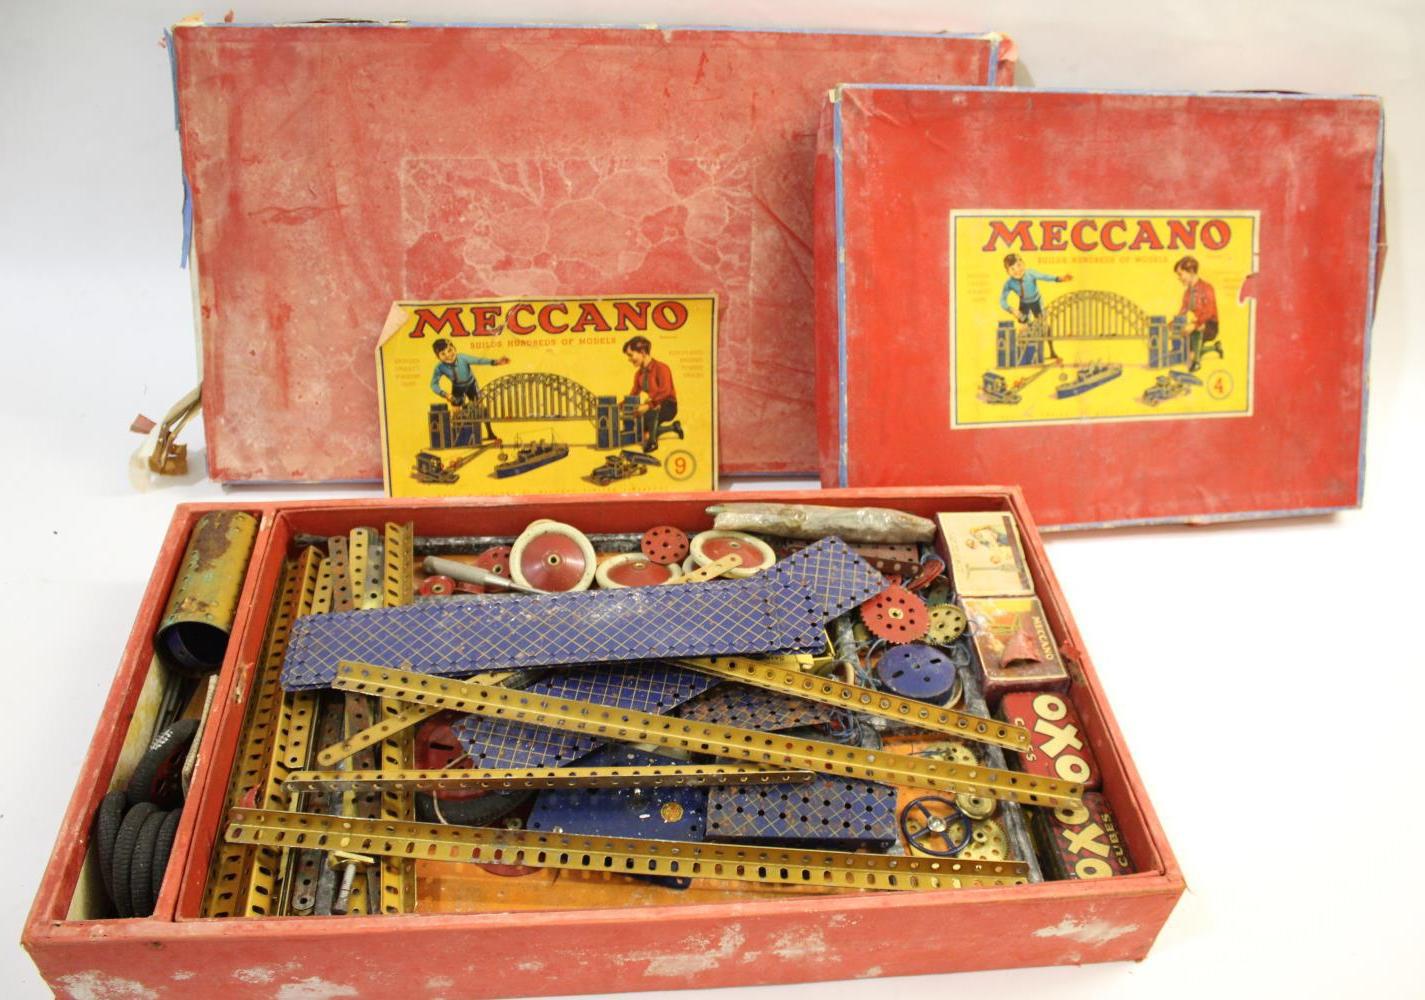 MECCANO BOXED SET a boxed set Meccano No 9, with 2 layers with various accessories, box and items in